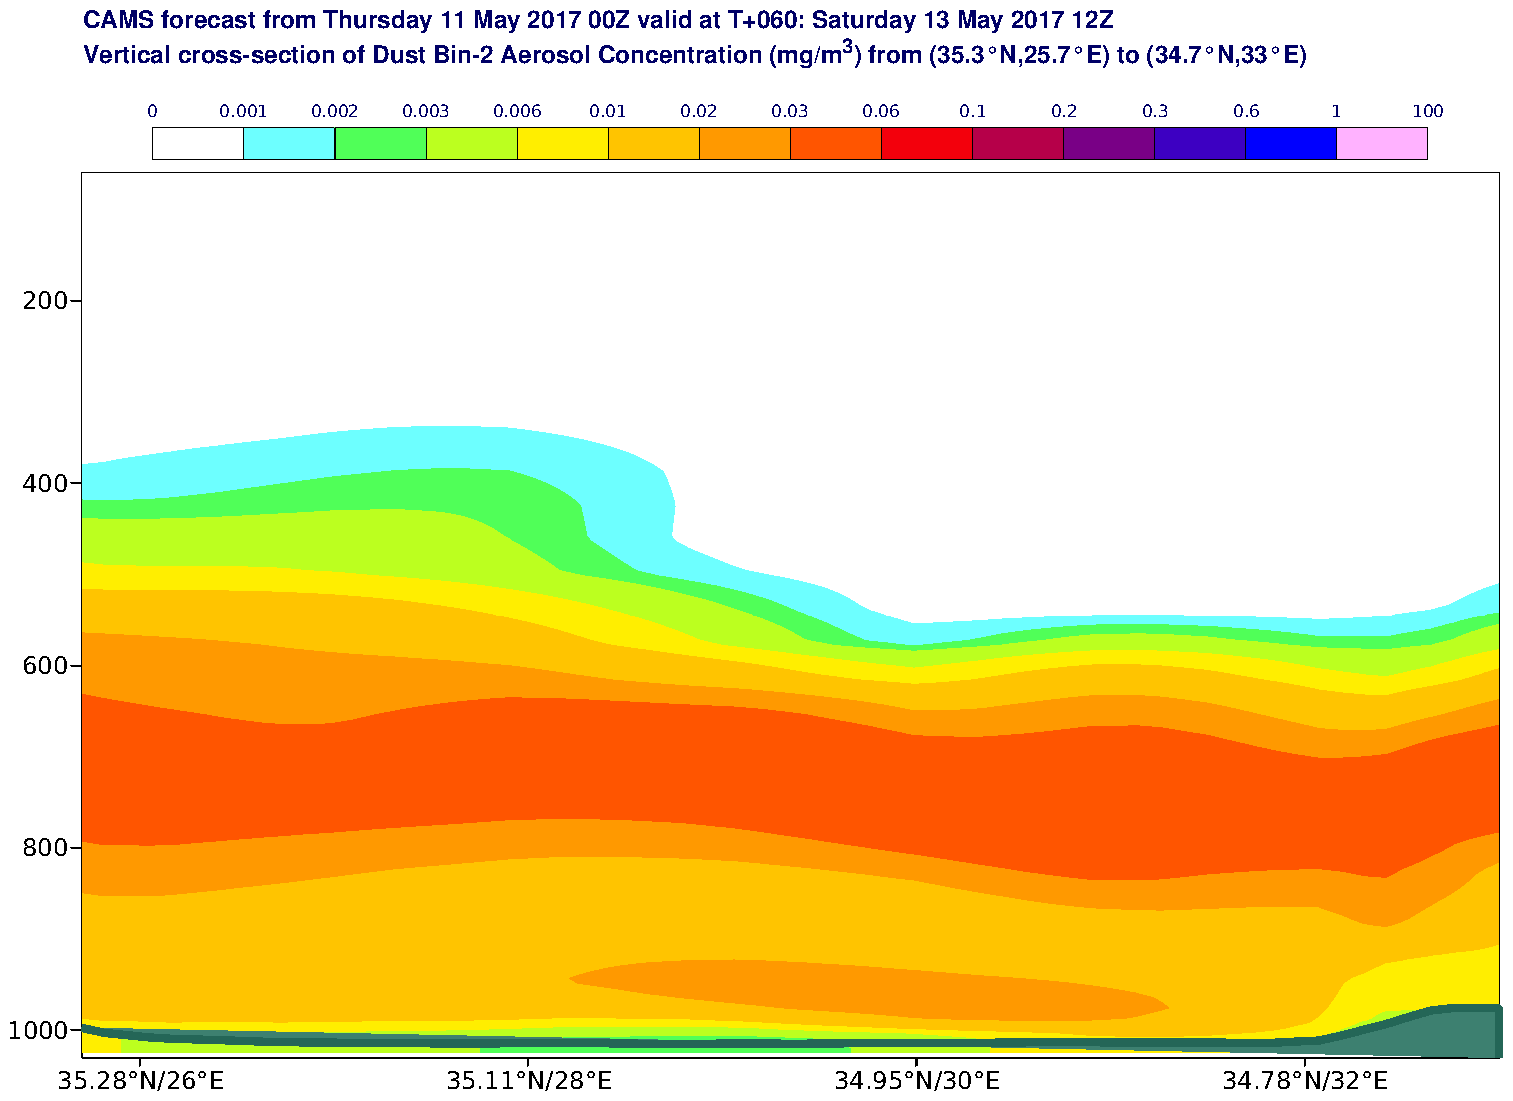 Vertical cross-section of Dust Bin-2 Aerosol Concentration (mg/m3) valid at T60 - 2017-05-13 12:00